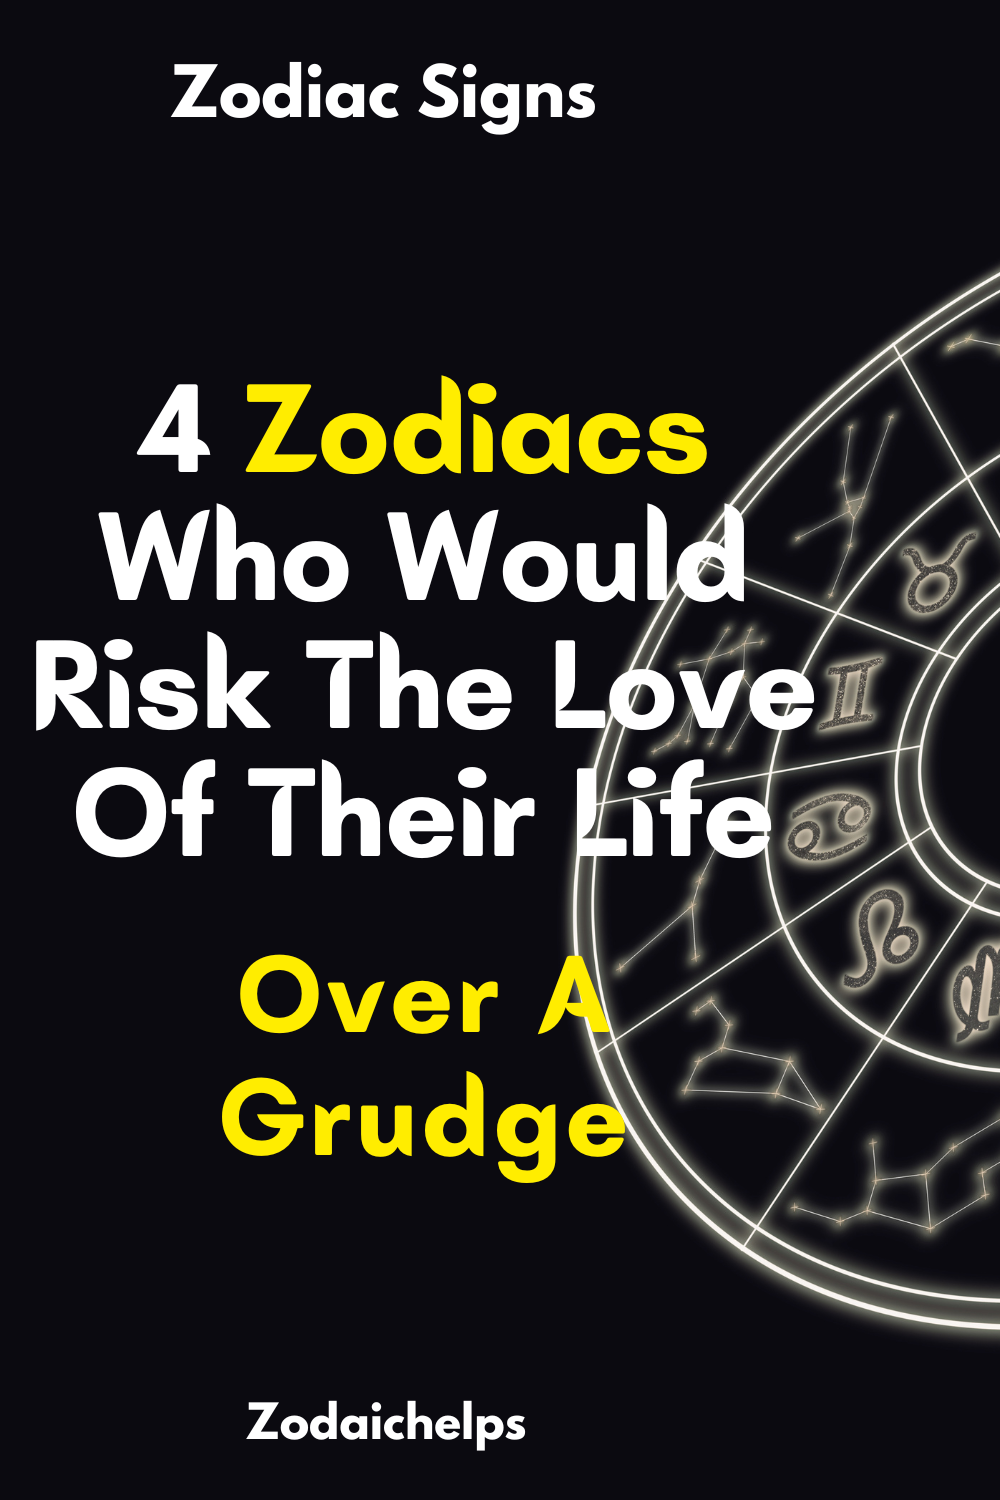 4 Zodiacs Who Would Risk The Love Of Their Life Over A Grudge